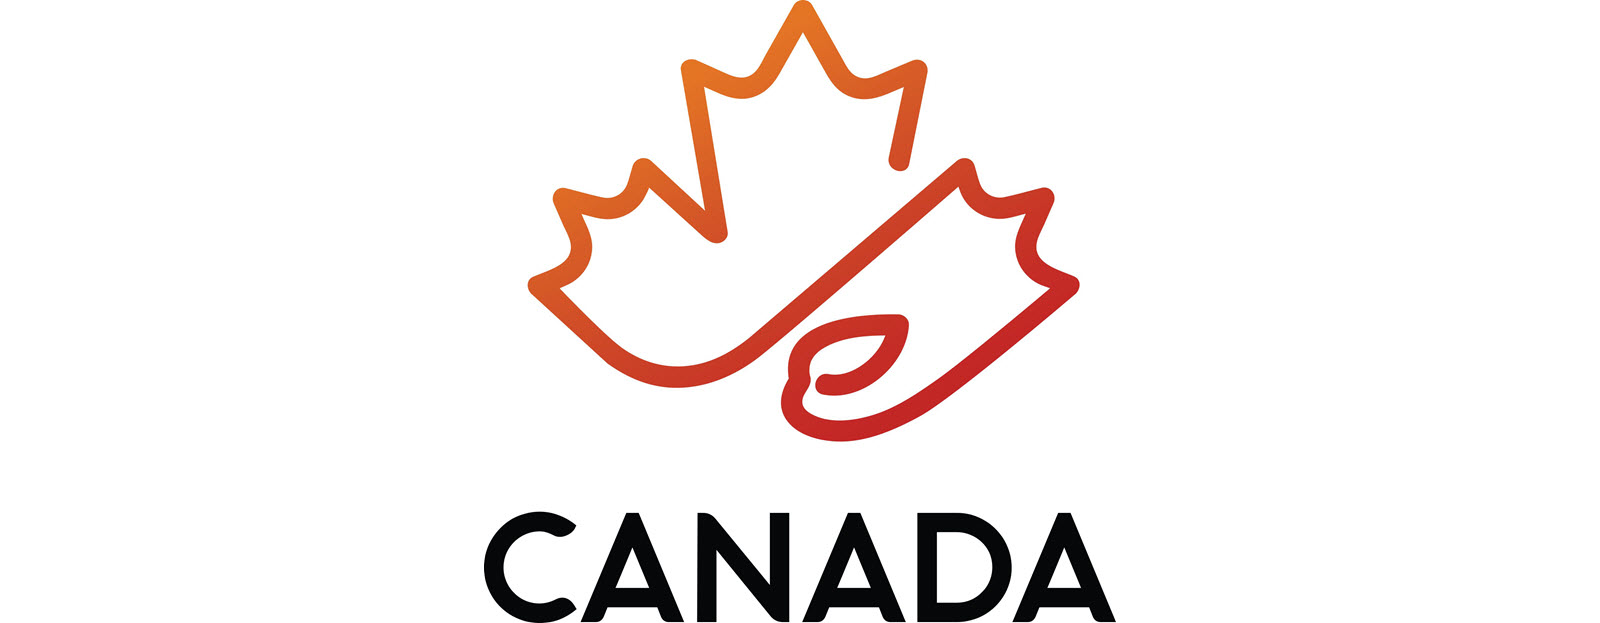 Canada Brand refresh for agriculture and agri-food products